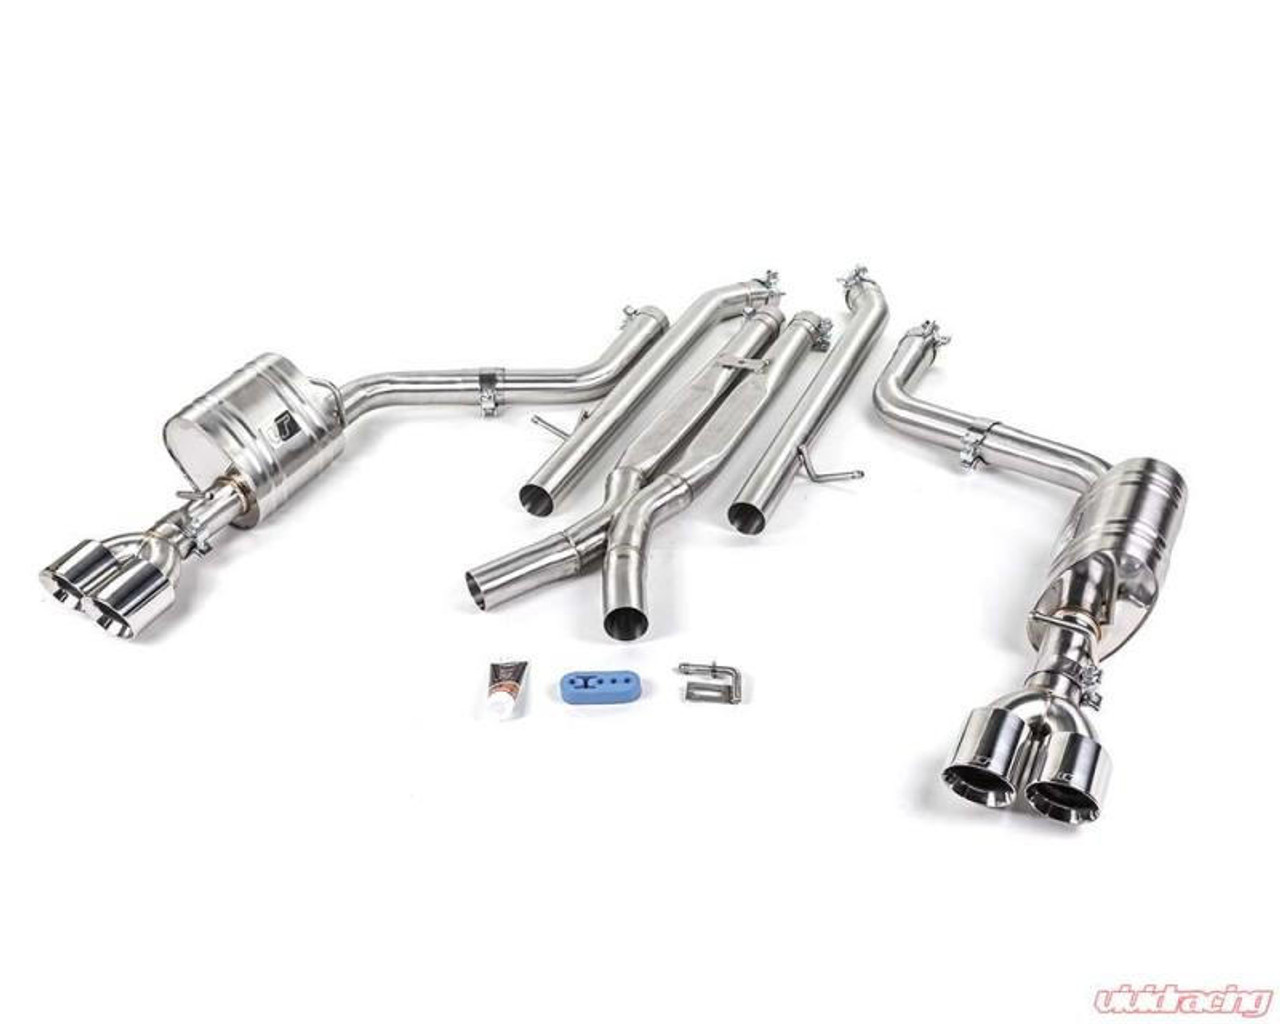 Vivid Racing VR Performance Dodge Charger 3.6L Stainless Exhaust - VR-CHRGER64-170S 